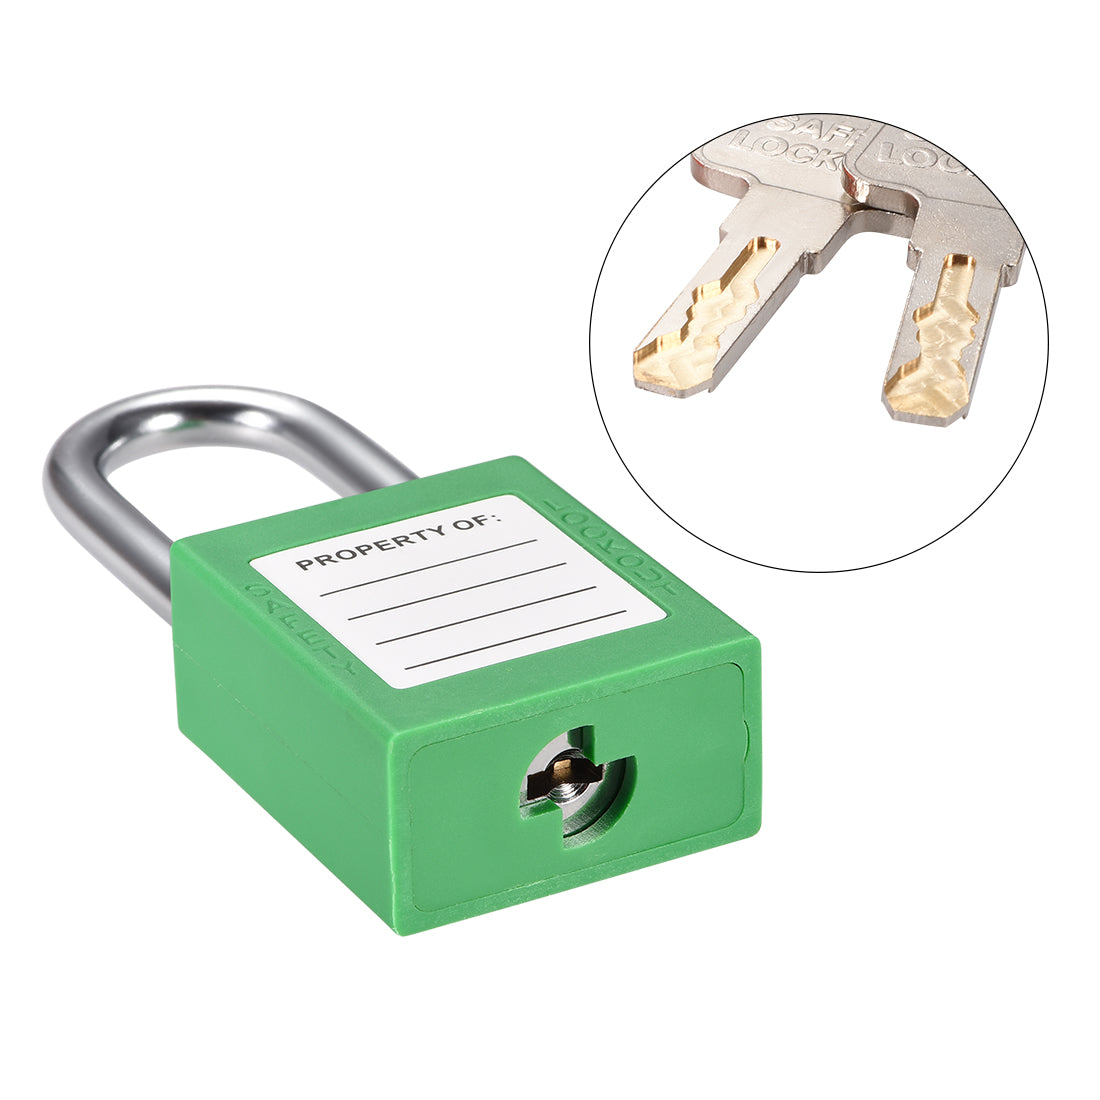 uxcell Uxcell Lockout Tagout Safety Padlock 38mm Steel Shackle Keyed Different Light Green